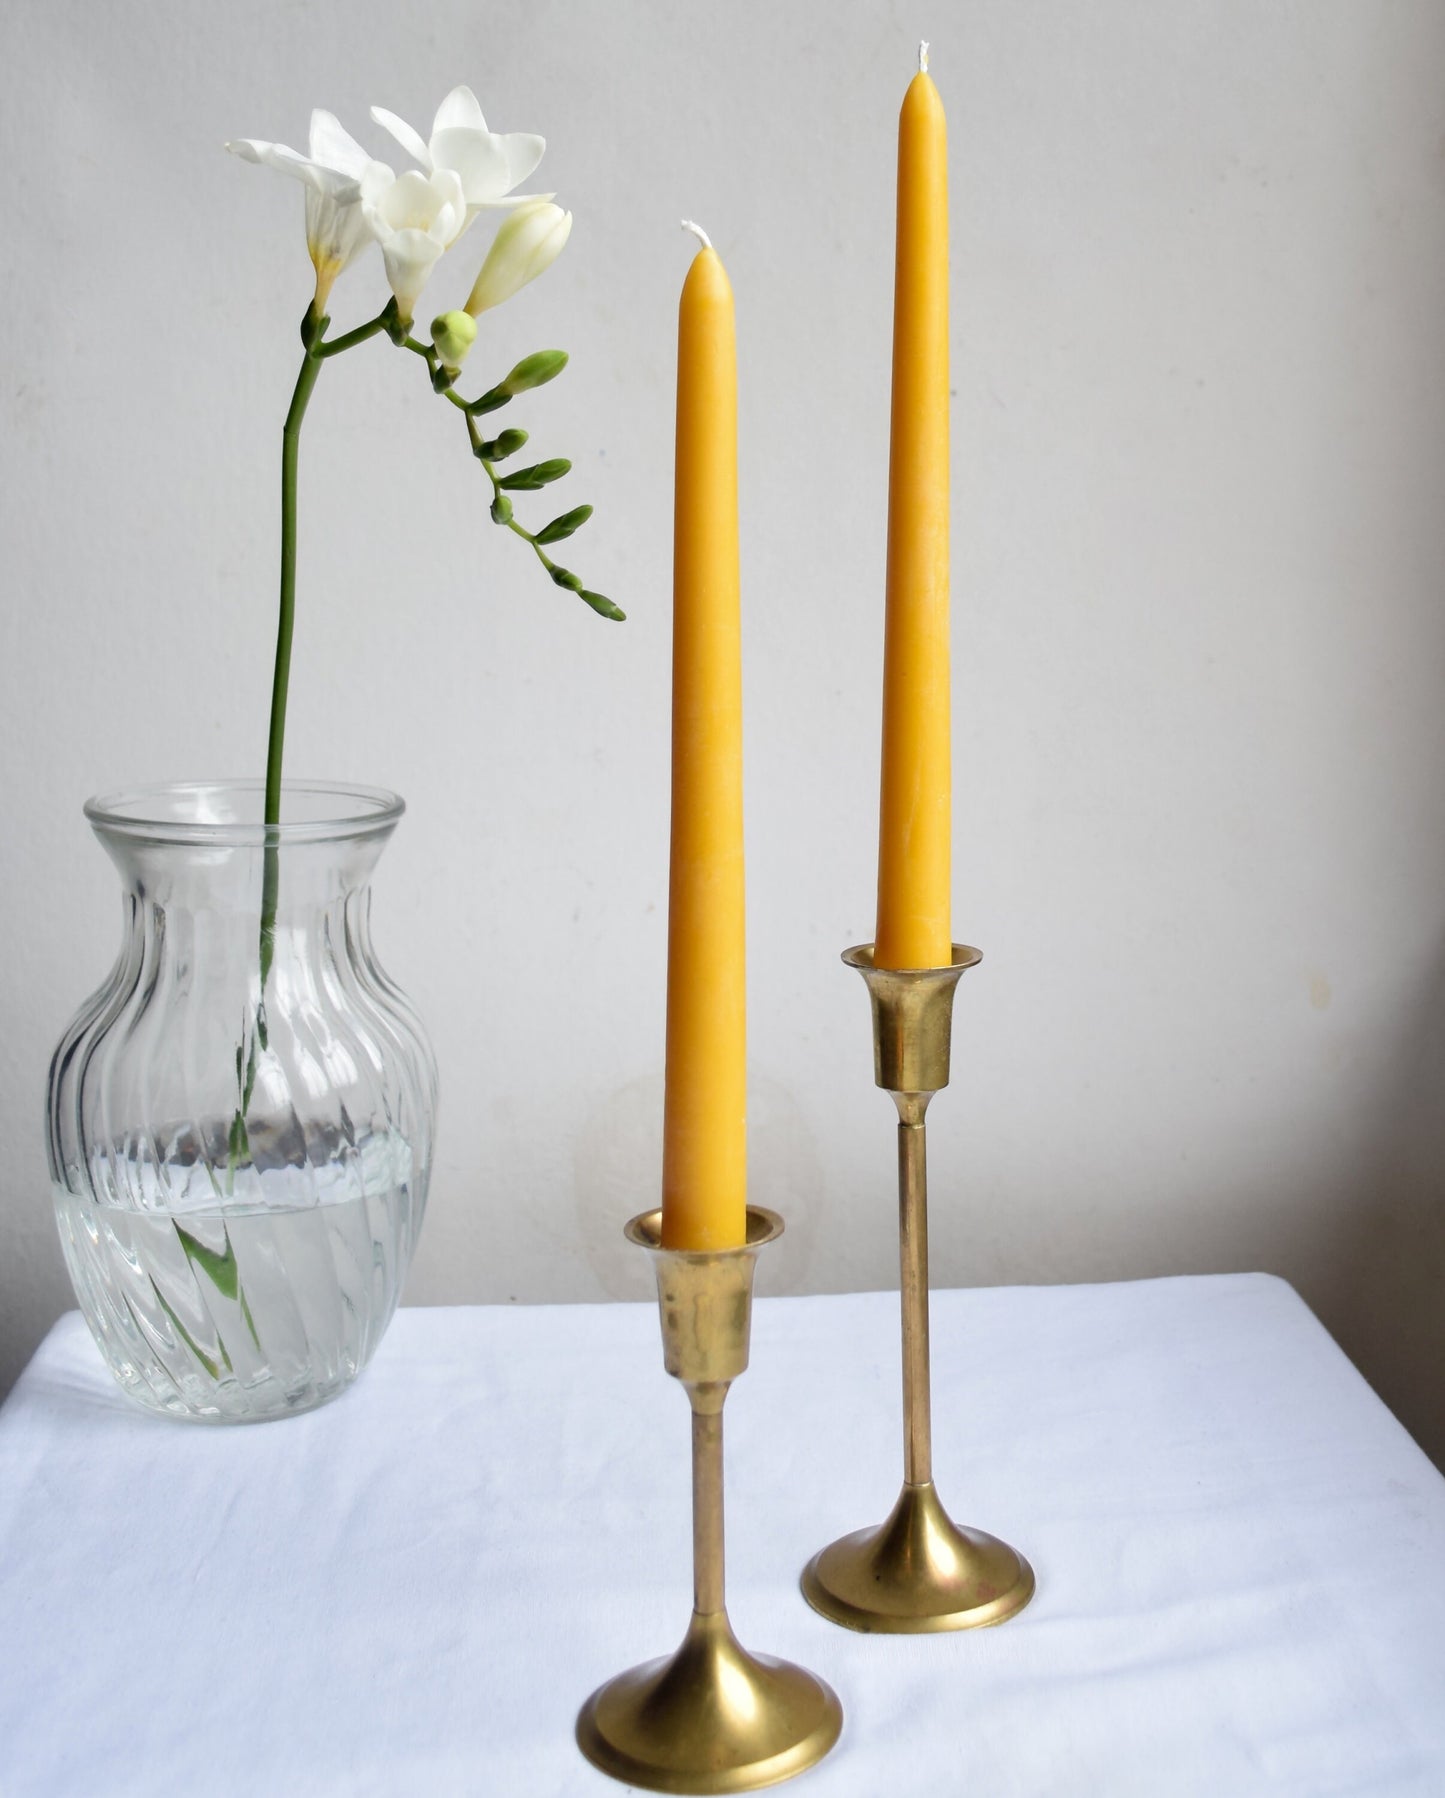 12 Tall Beeswax Taper Candles, 100% Pure Handfiltered Beeswax